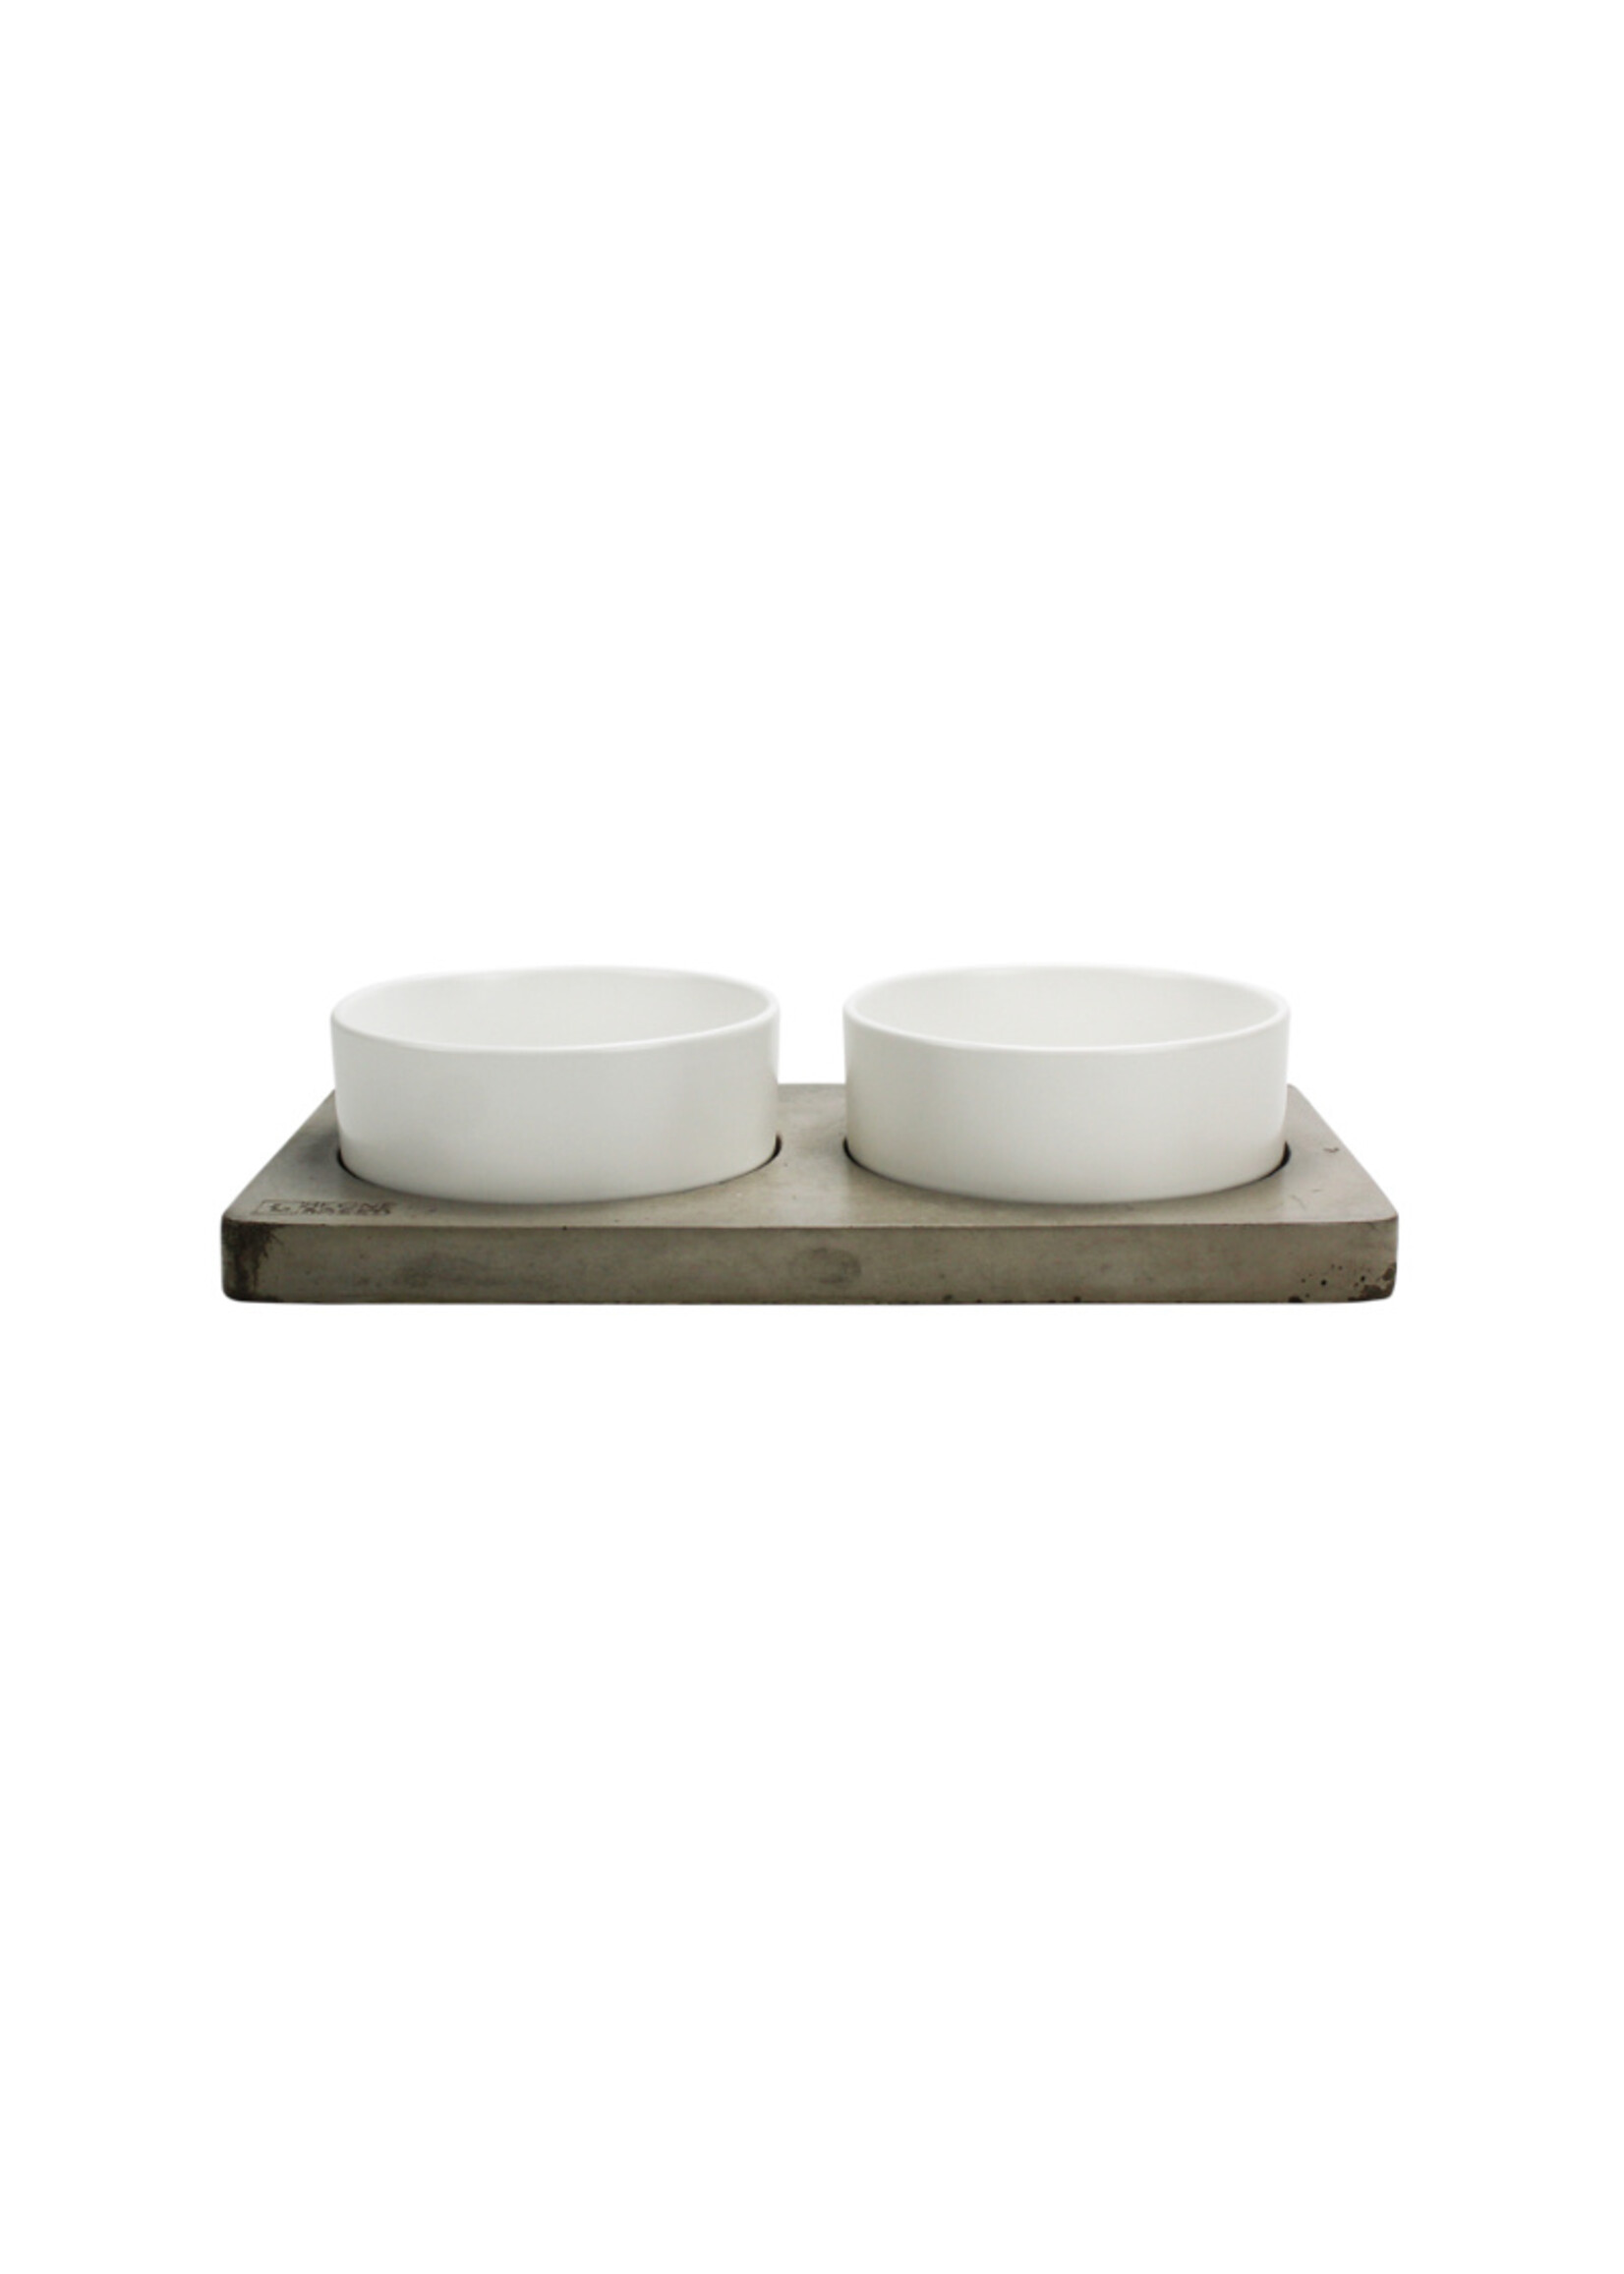 Be One Breed Be One Breed Concrete Diner w/Ceramic Bowls White